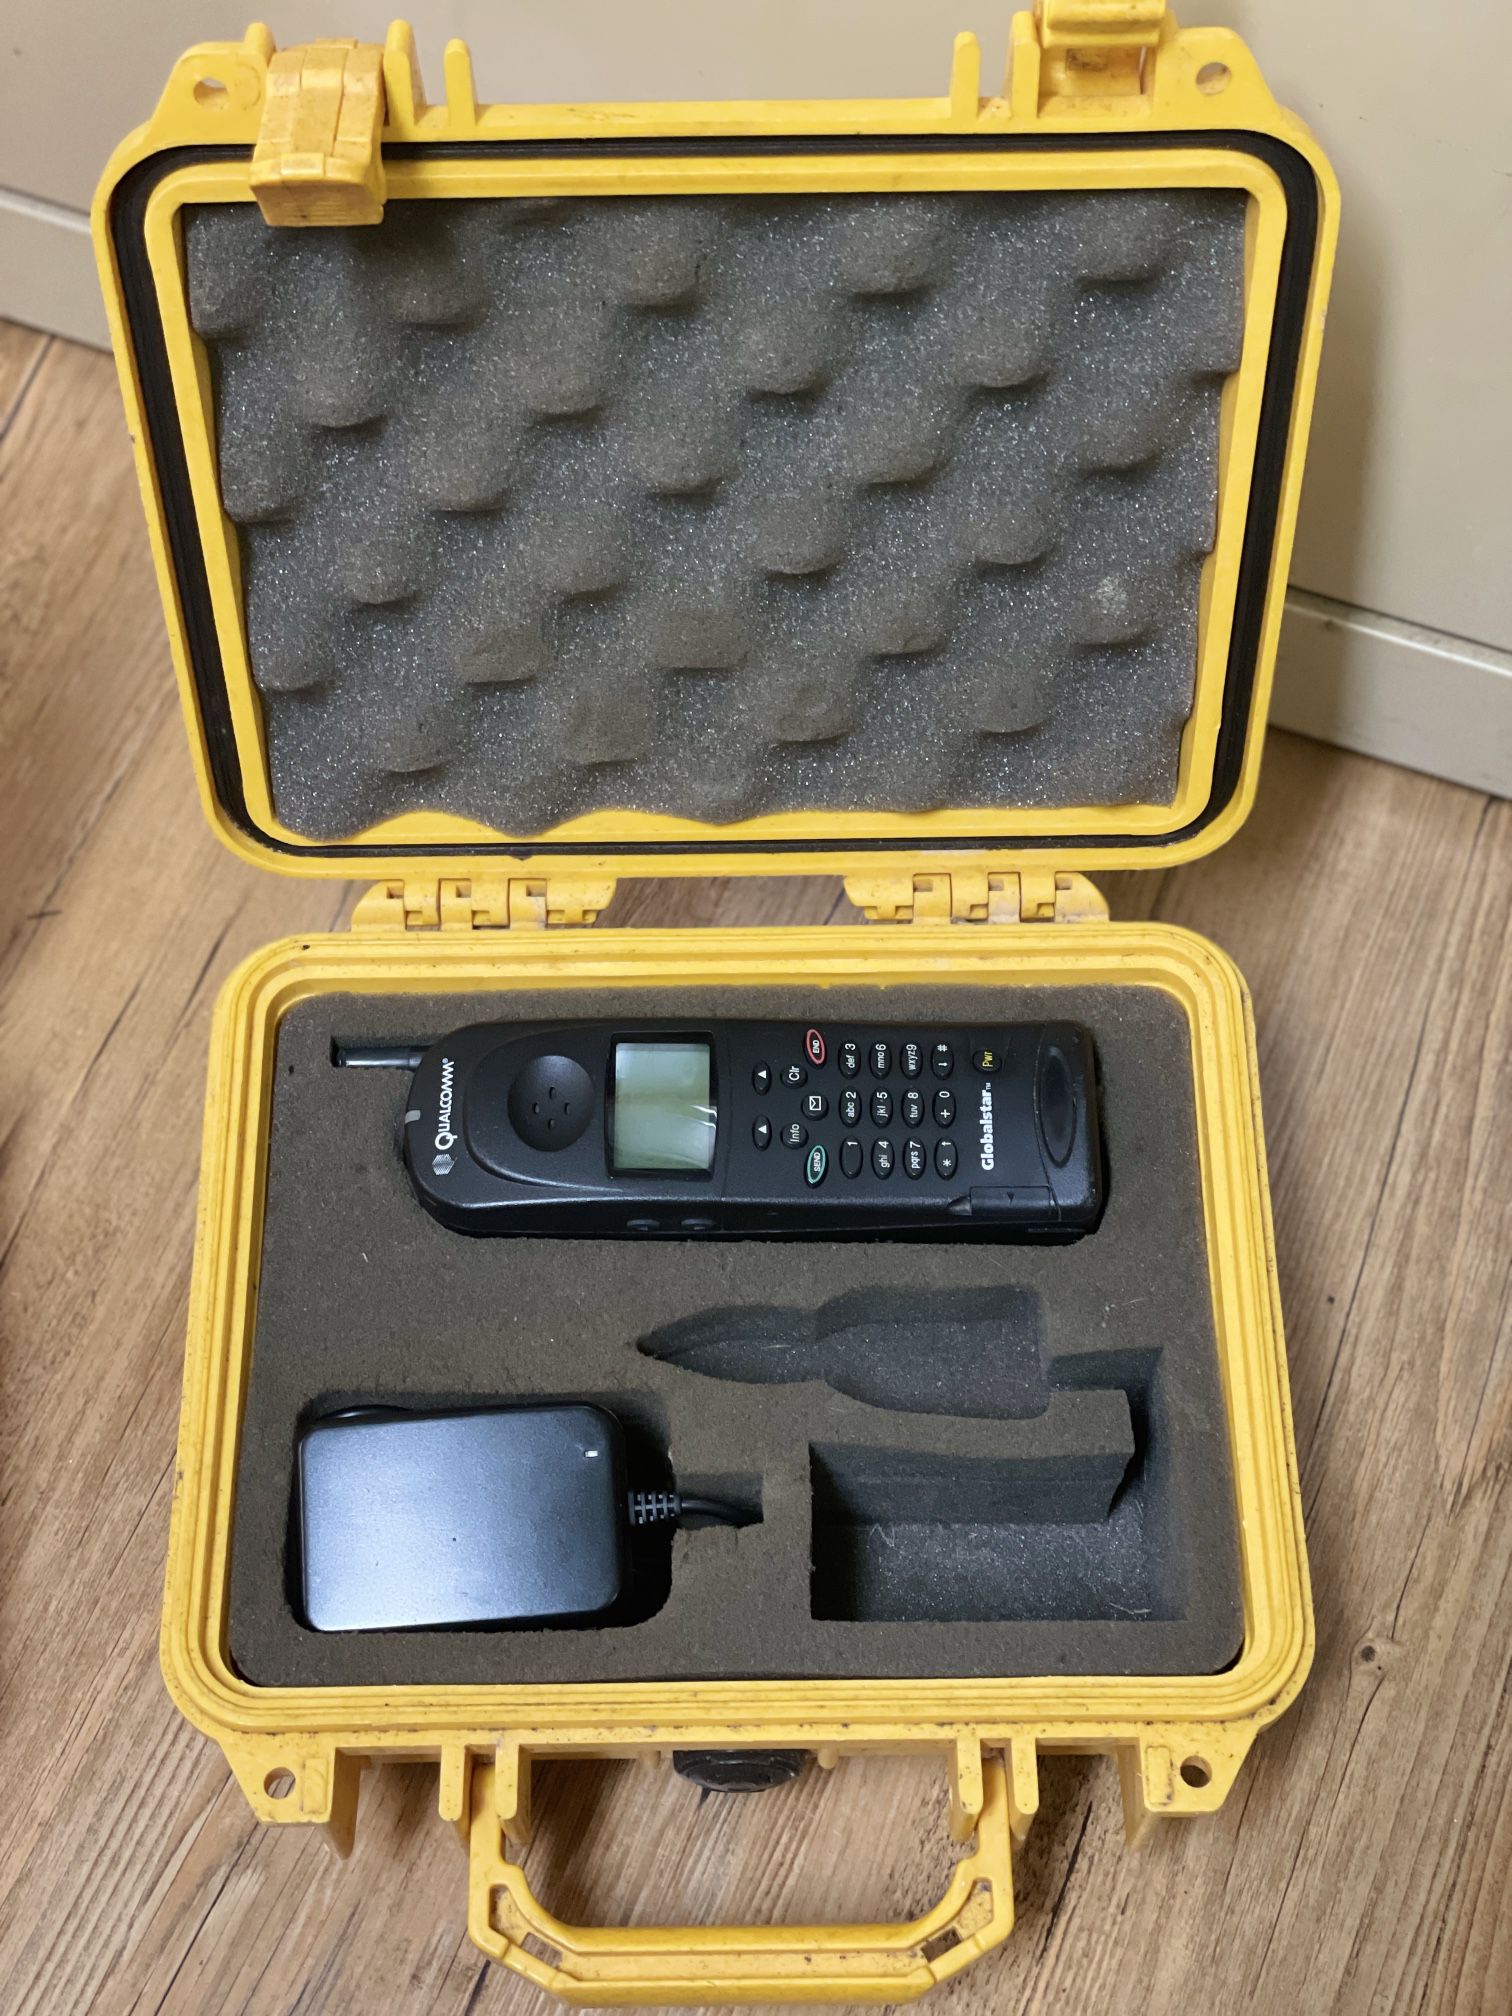 Globalstar Satellite Phone Gsp 1600 includes unlimited minutes for one year